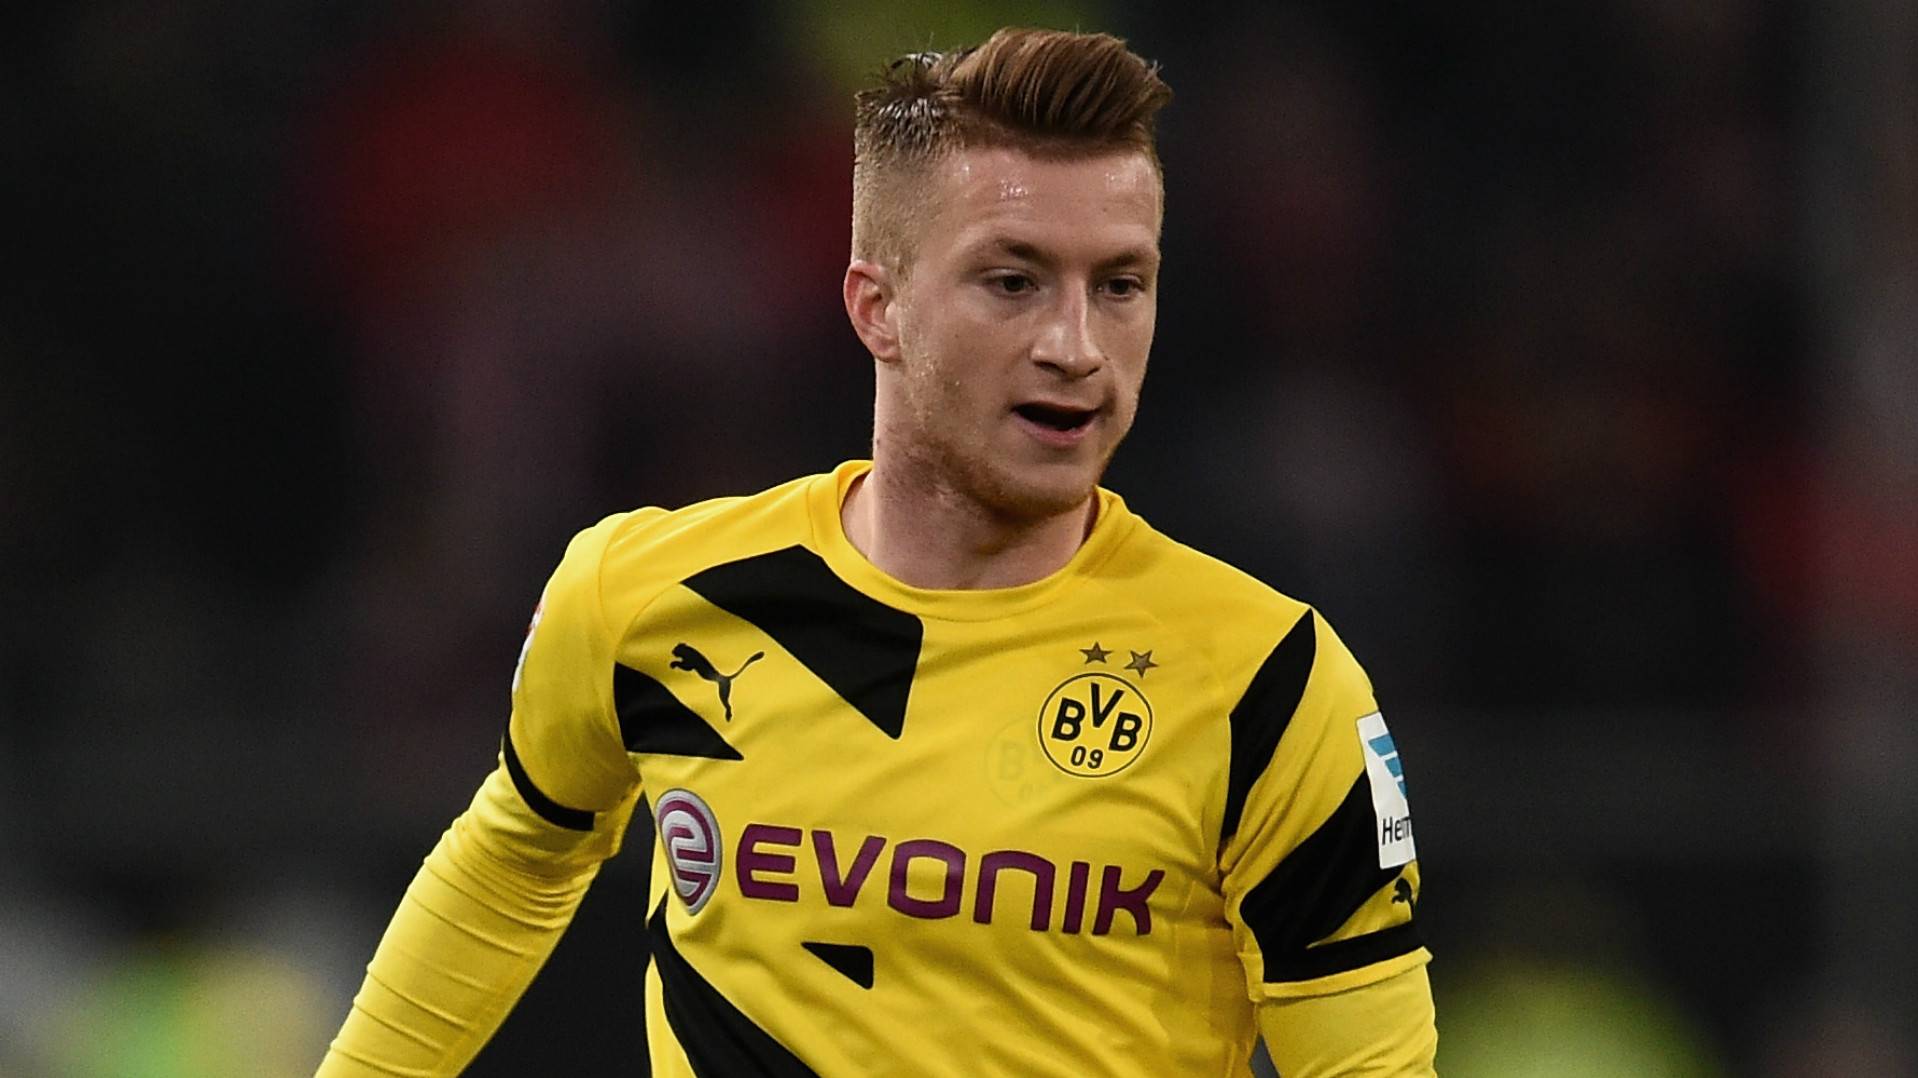 Marco Reus happy as the constant and the mentor at Borussia Dortmund - ESPN